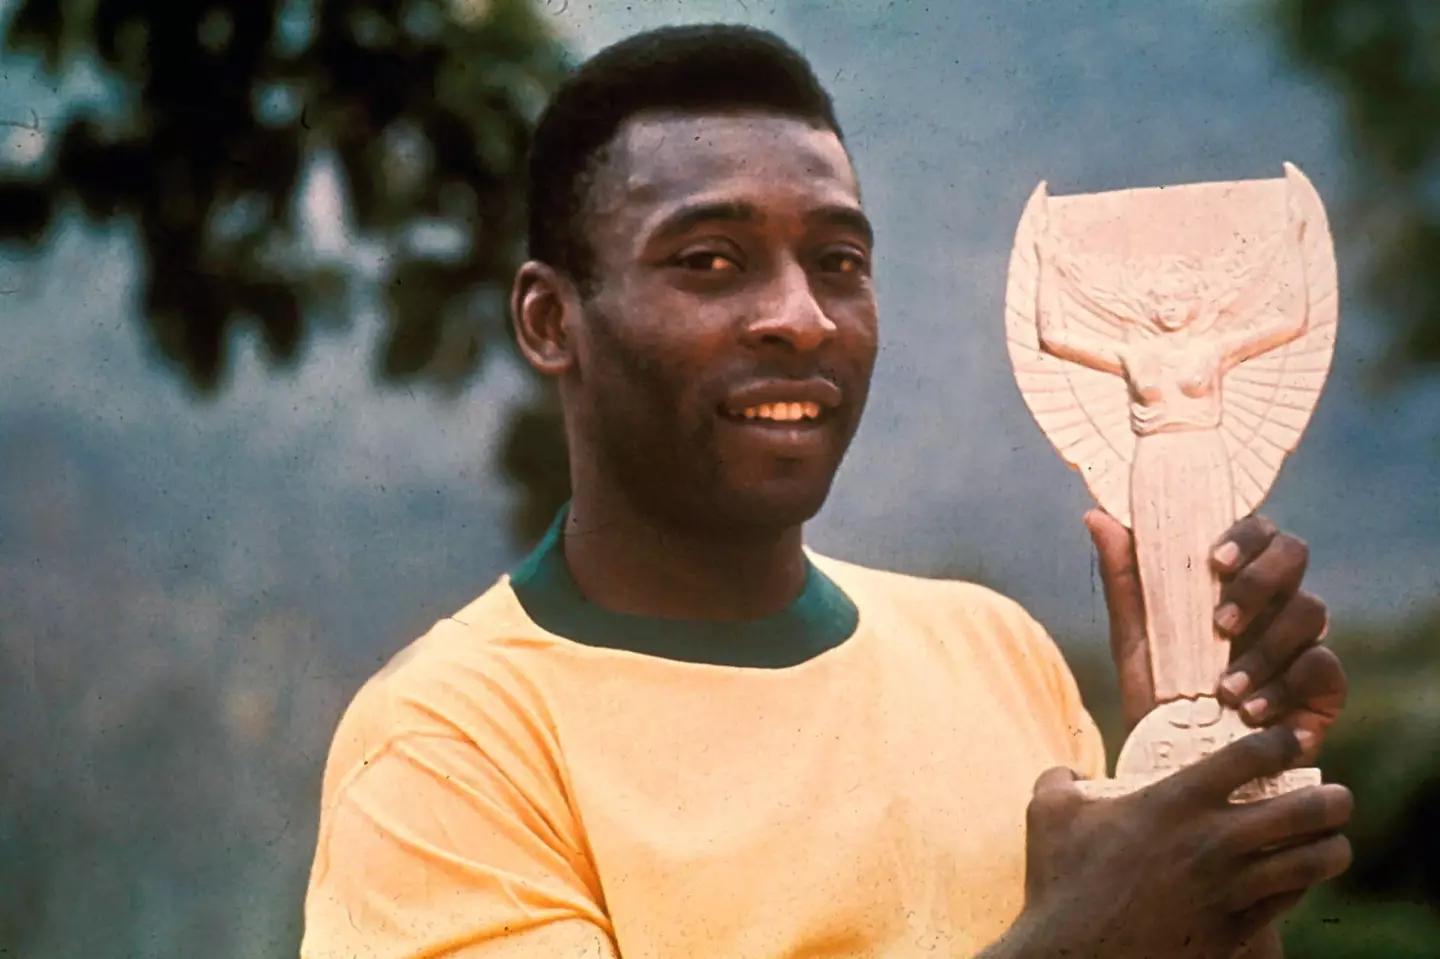 Pele is regarded as one of the best players ever. (Image